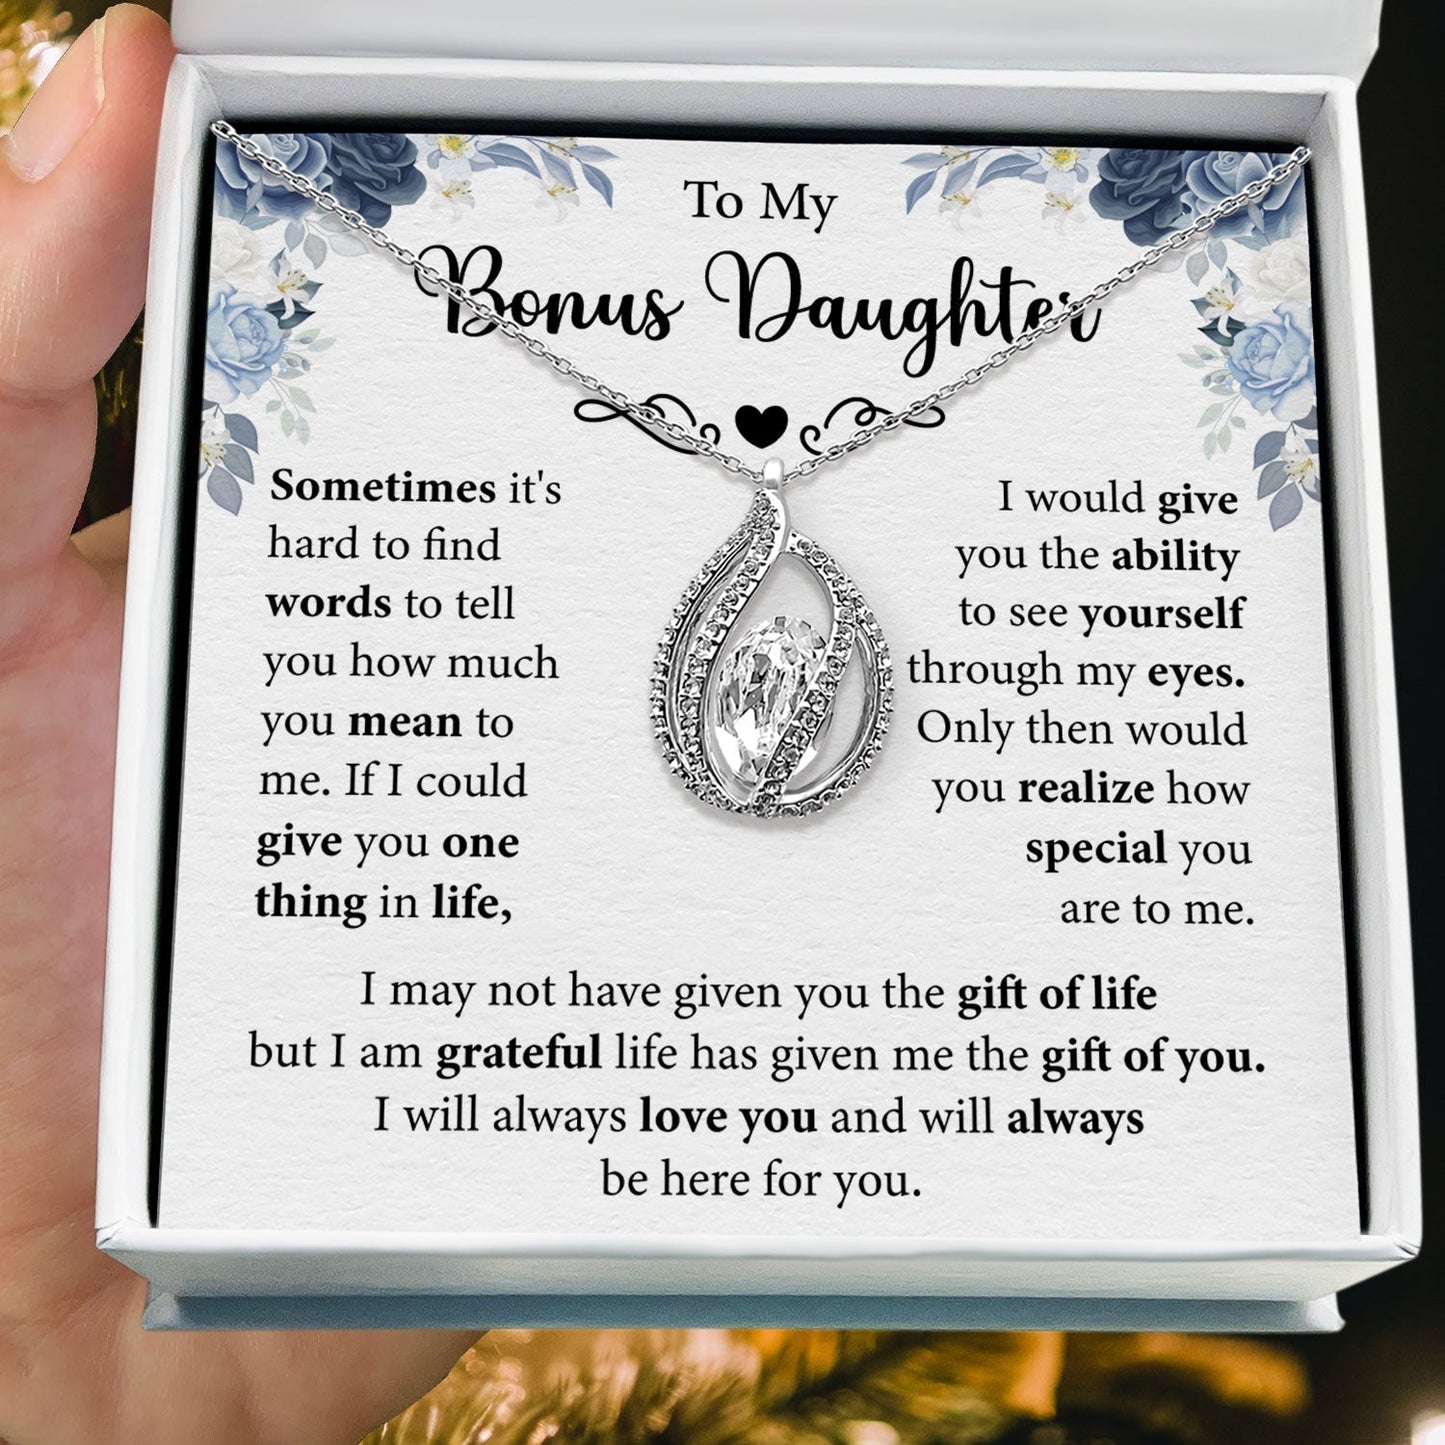 To My Bonus Daughter - I Will Always Be Here For You - Orbital Birdcage Necklace Elsy Style Necklaces